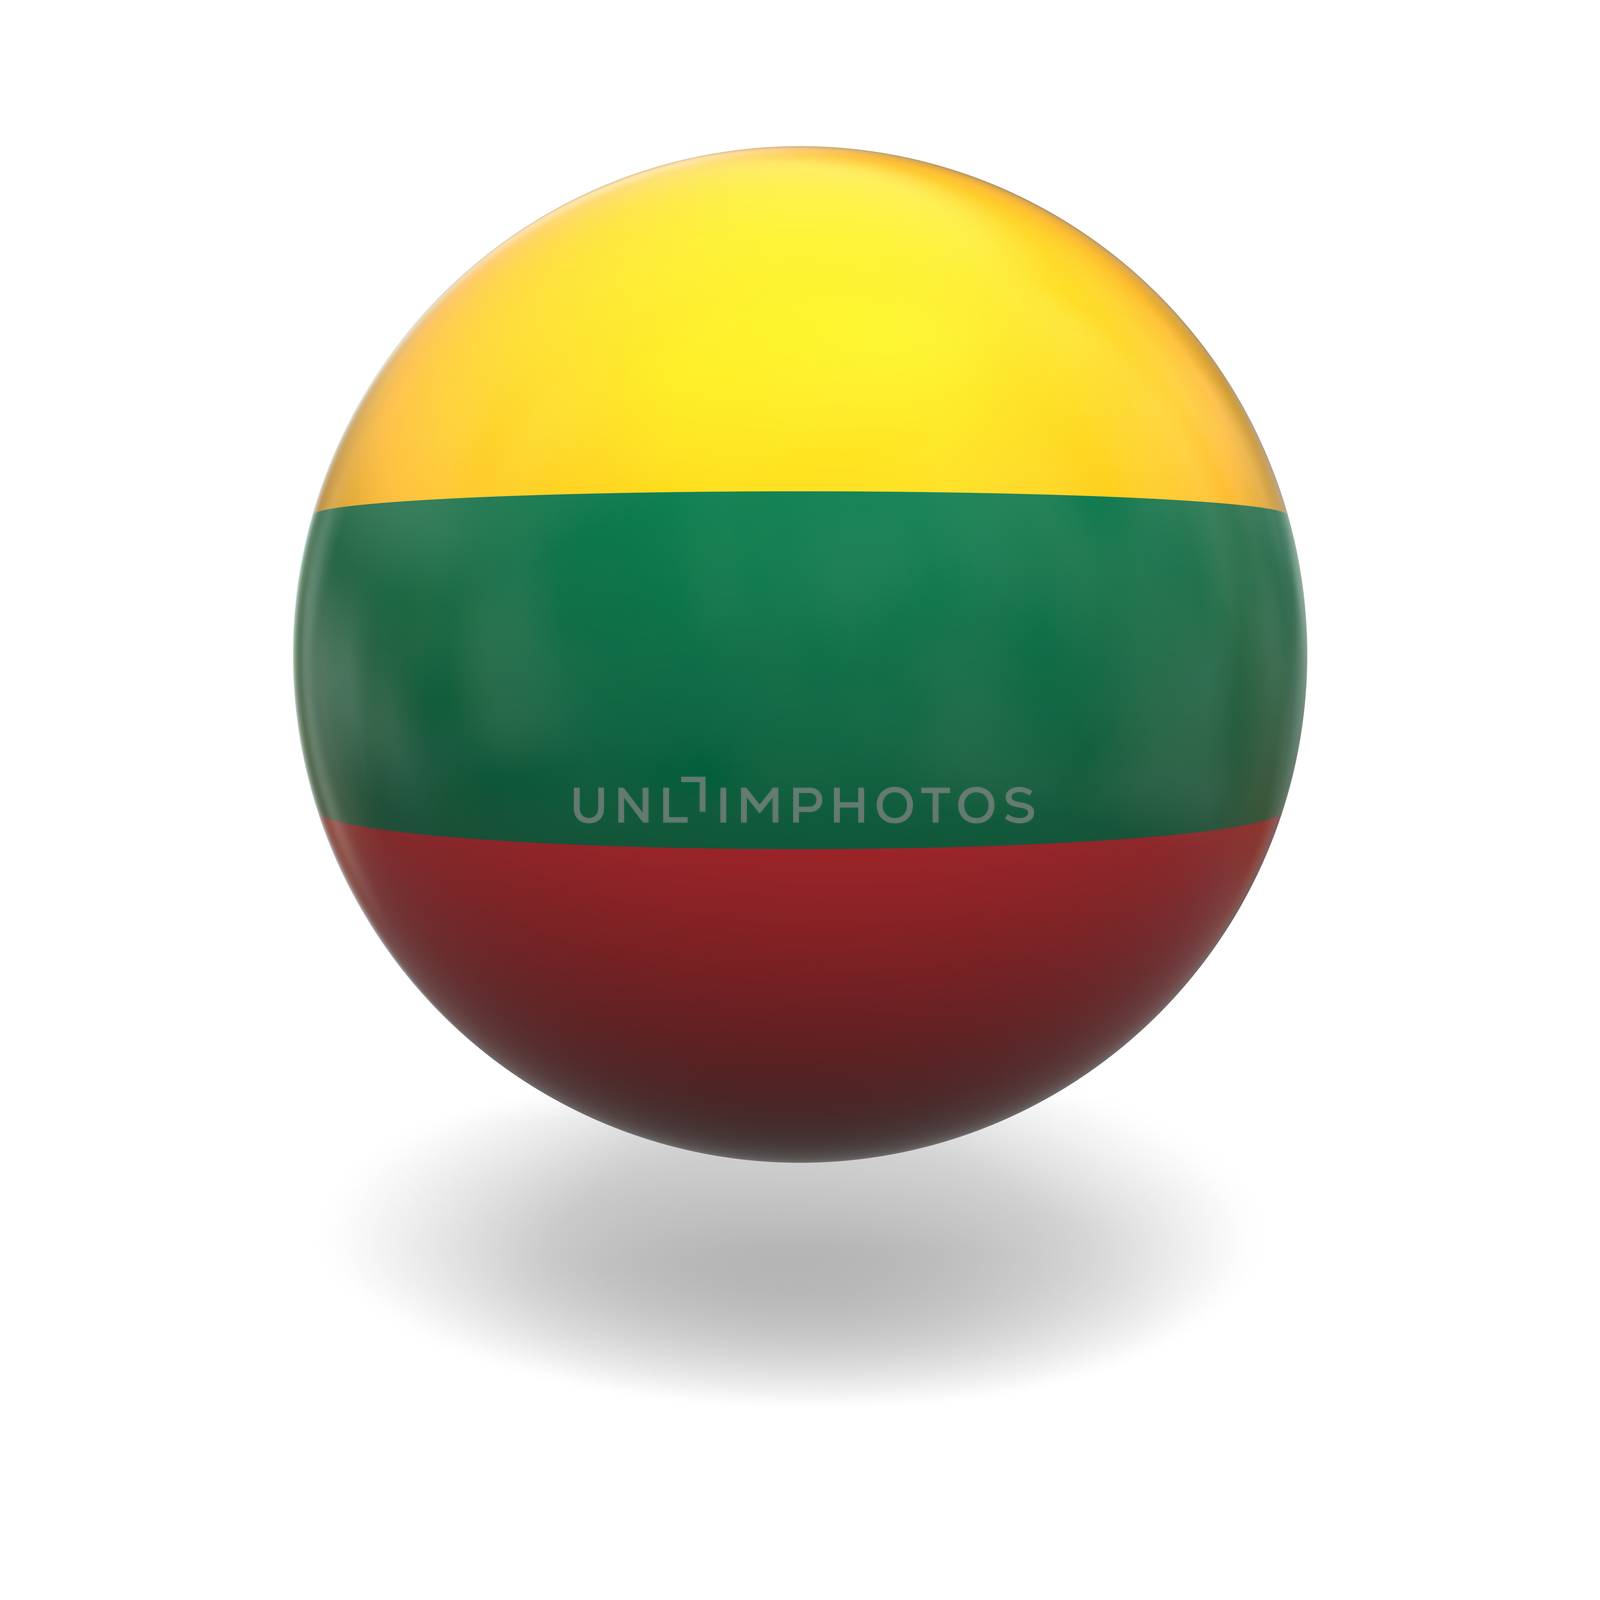 Lithuanian flag by Harvepino